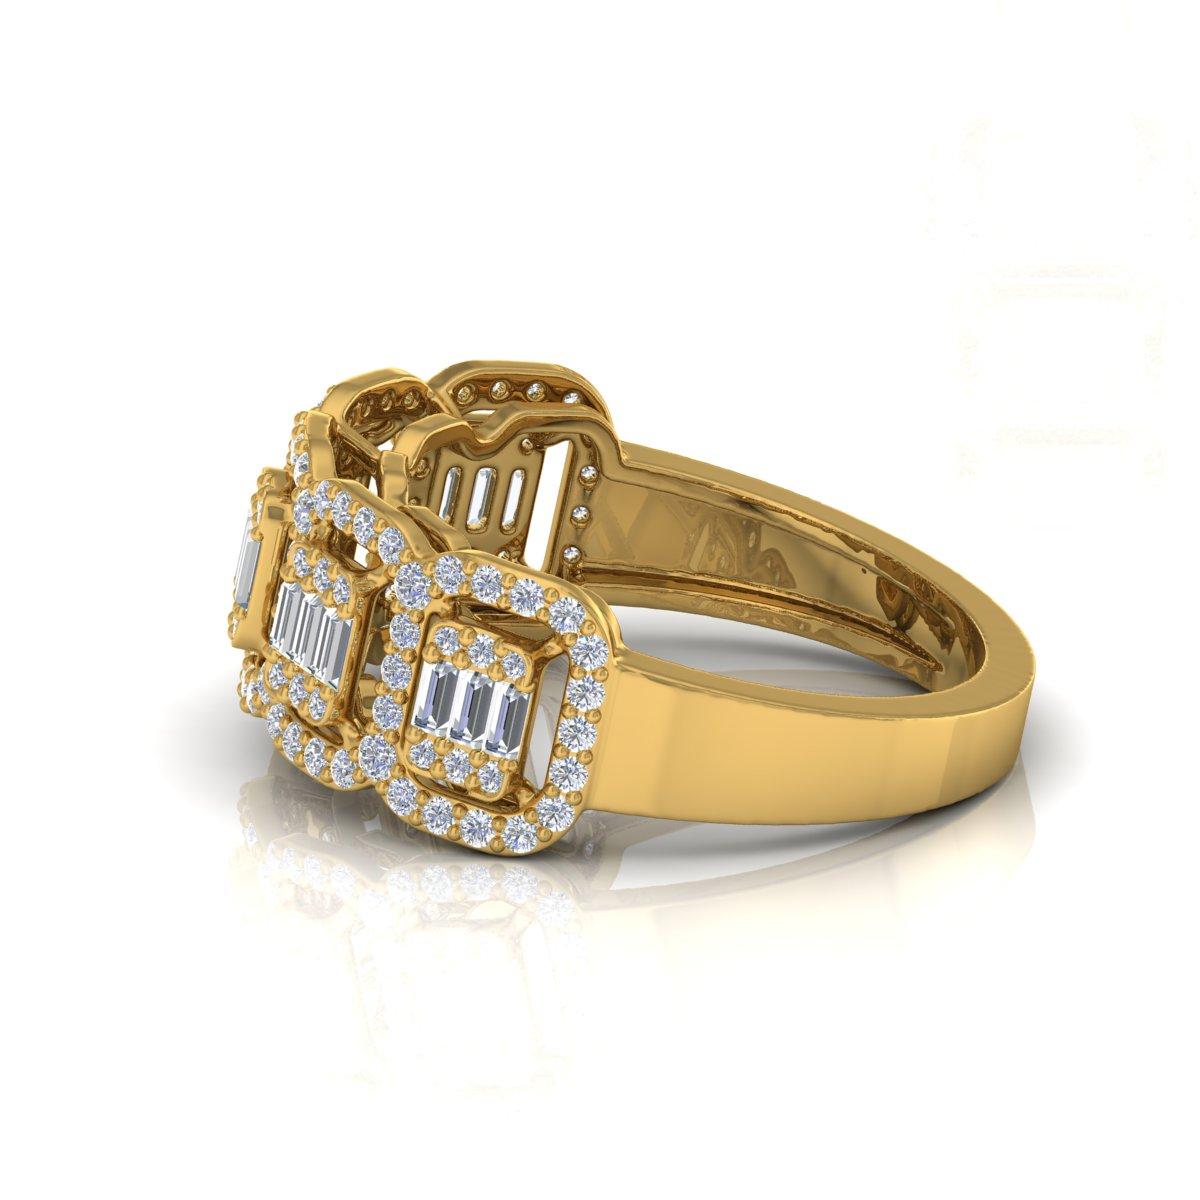 For Sale:  0.95 Carat Si Clarity HI Color Baguette Diamond Ring 18k Yellow Gold Jewelry 3